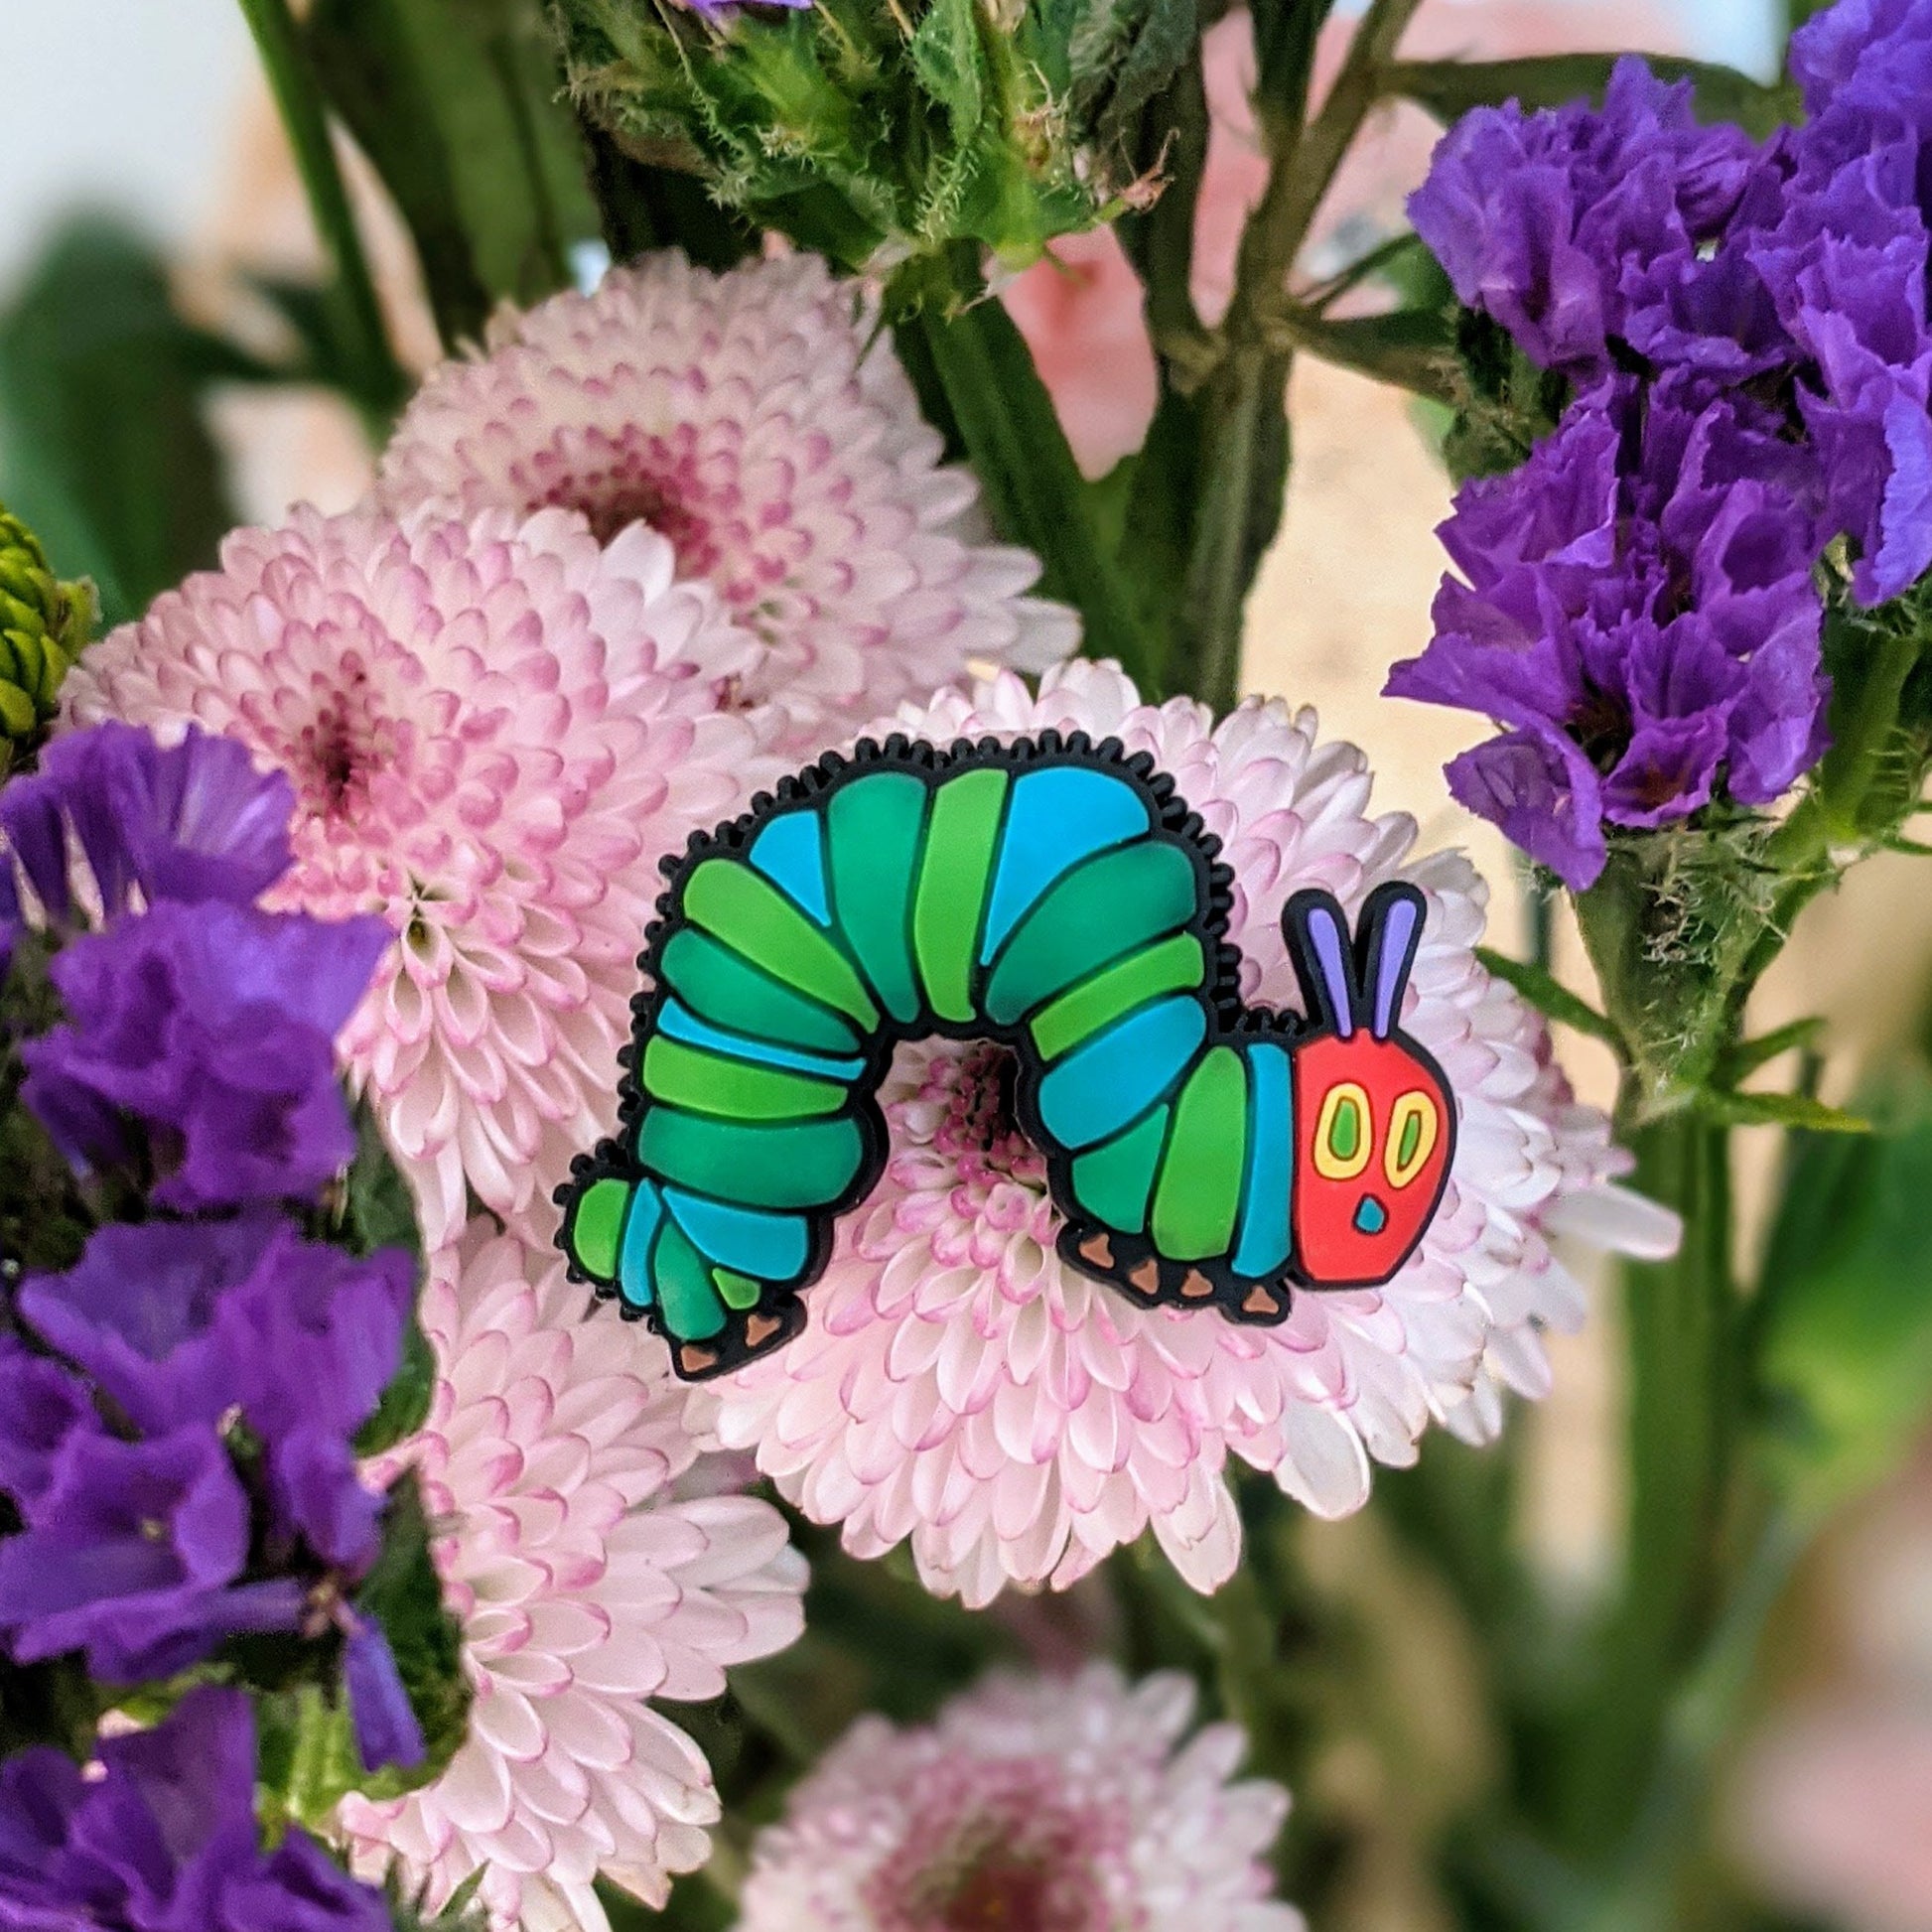 The Very Hungry Caterpillar PVC enamel pin on white background. Caterpillar has a red face with yellow and green eyes , with purple antennas, and a light green and dark green body. the pin is sitting on a pink flower and is surroundsed by other purple and pink flowers.